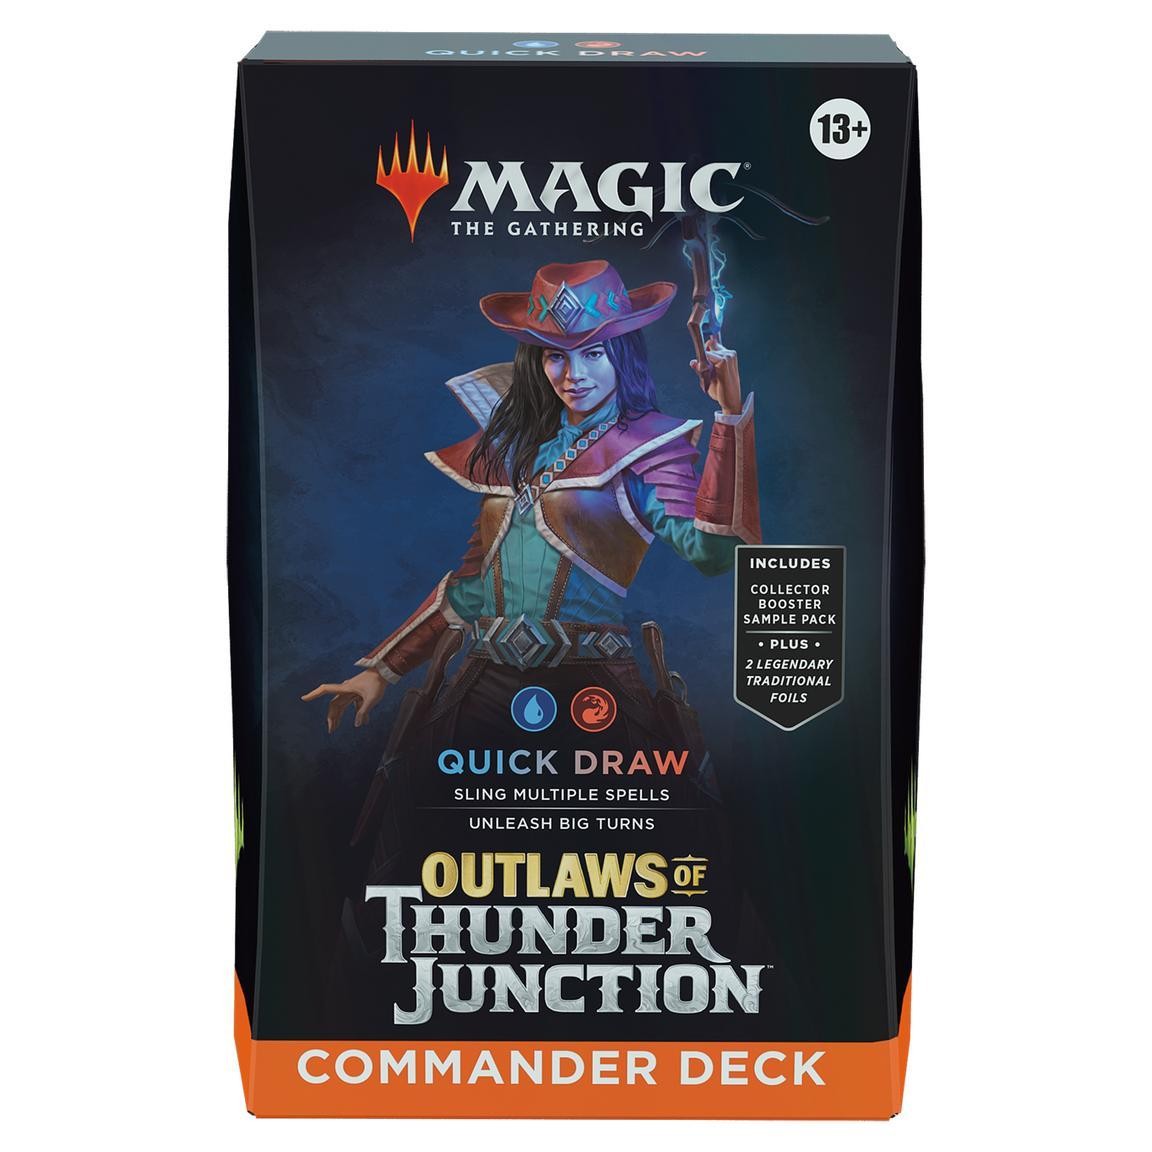 Magic: the Gathering: Outlaws of Thunder Junction Commander Deck